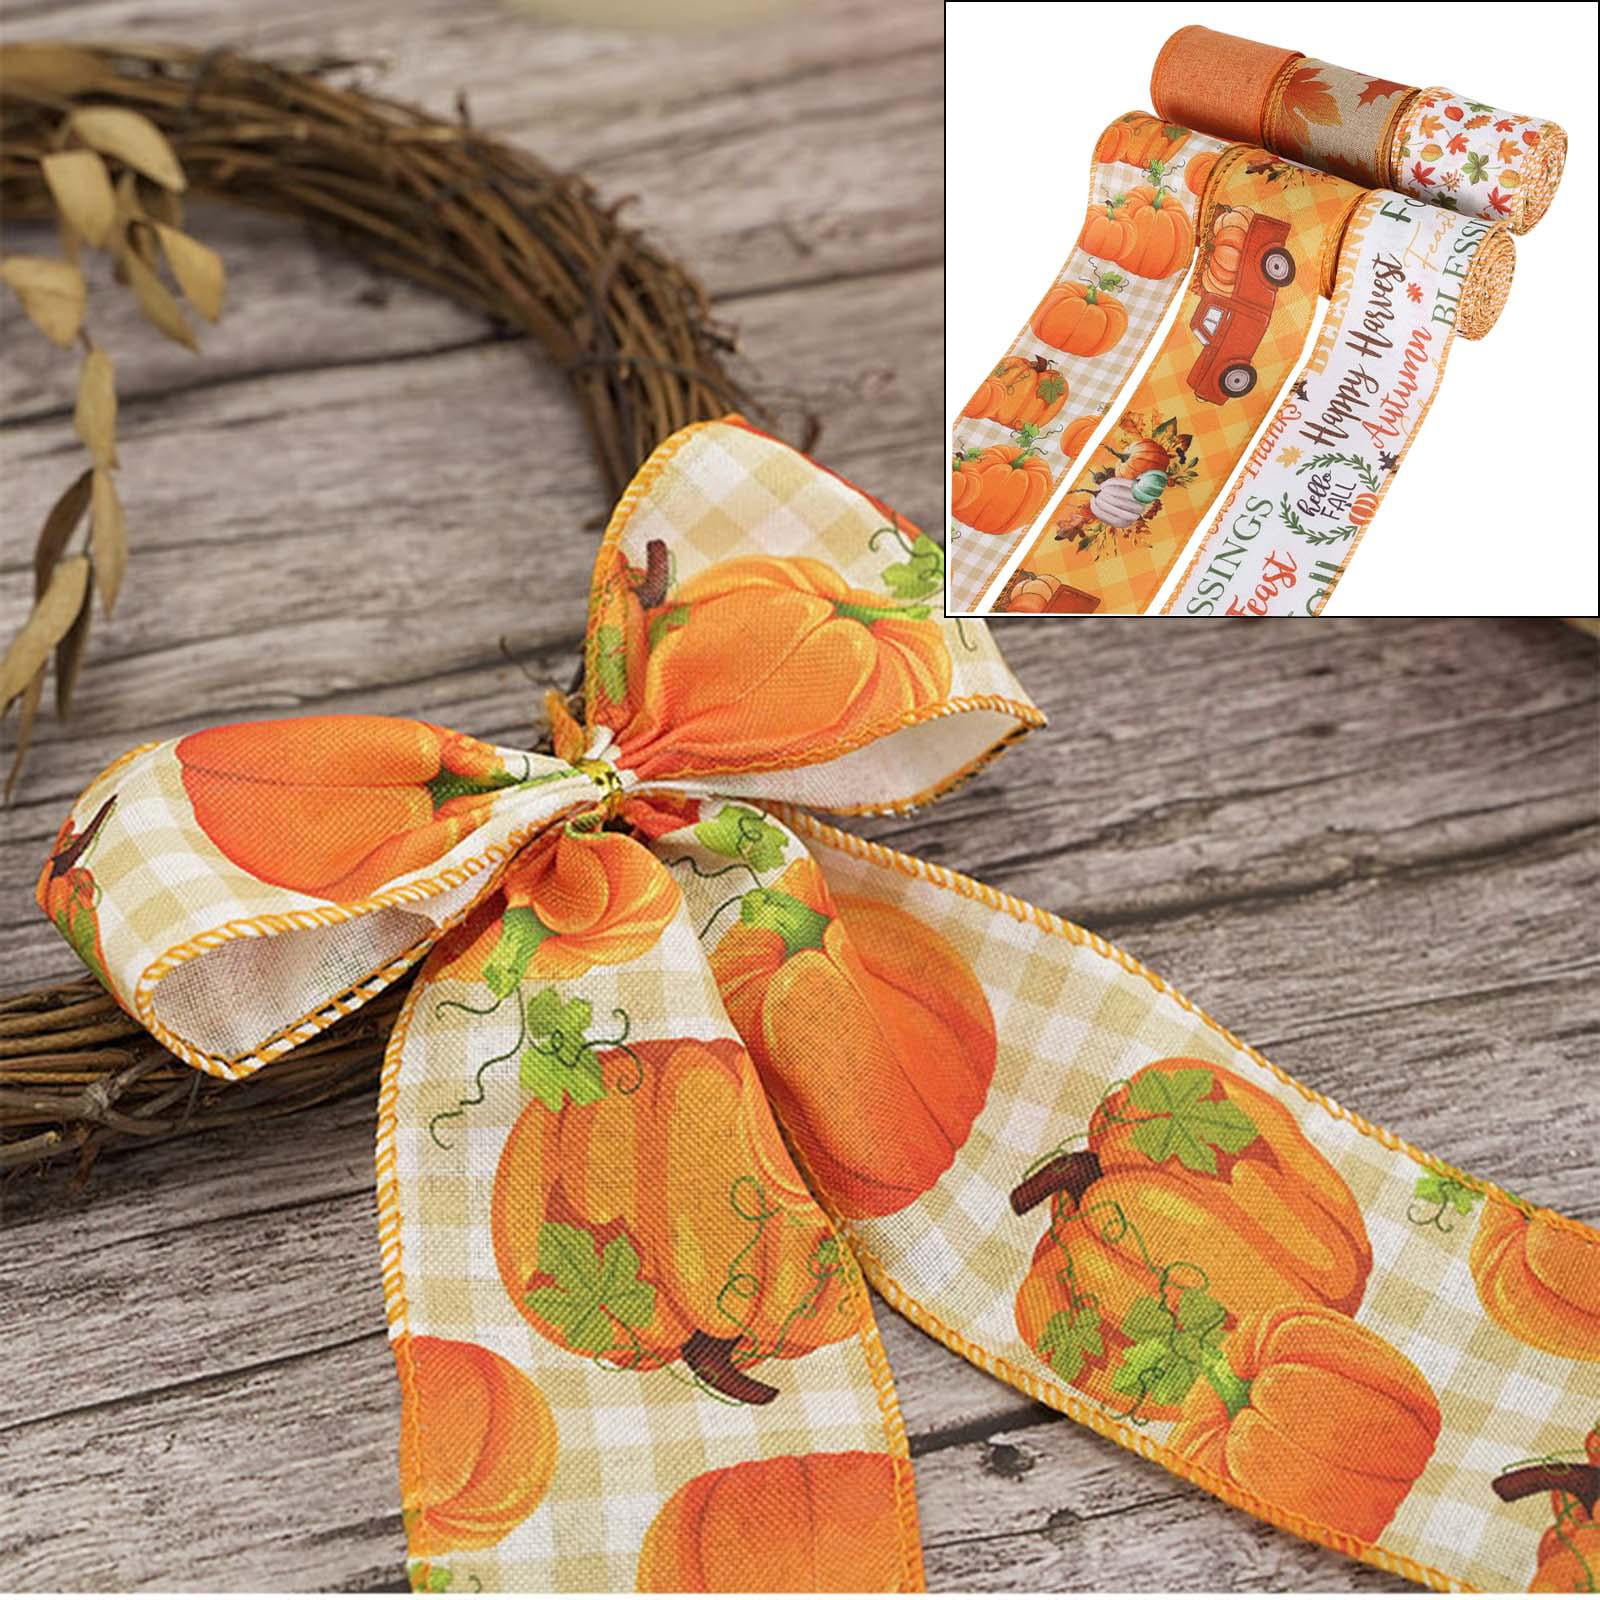  H1vojoxo 4PCS Fall Wired Ribbon for Crafts 2 inch Thanksgiving  Ribbon for Gift Wrapping Autumn Wired Ribbon for Wreaths Fall Pumpkin Maple  Leaf Wire Ribbon for Bows Making 30 Yards Wired